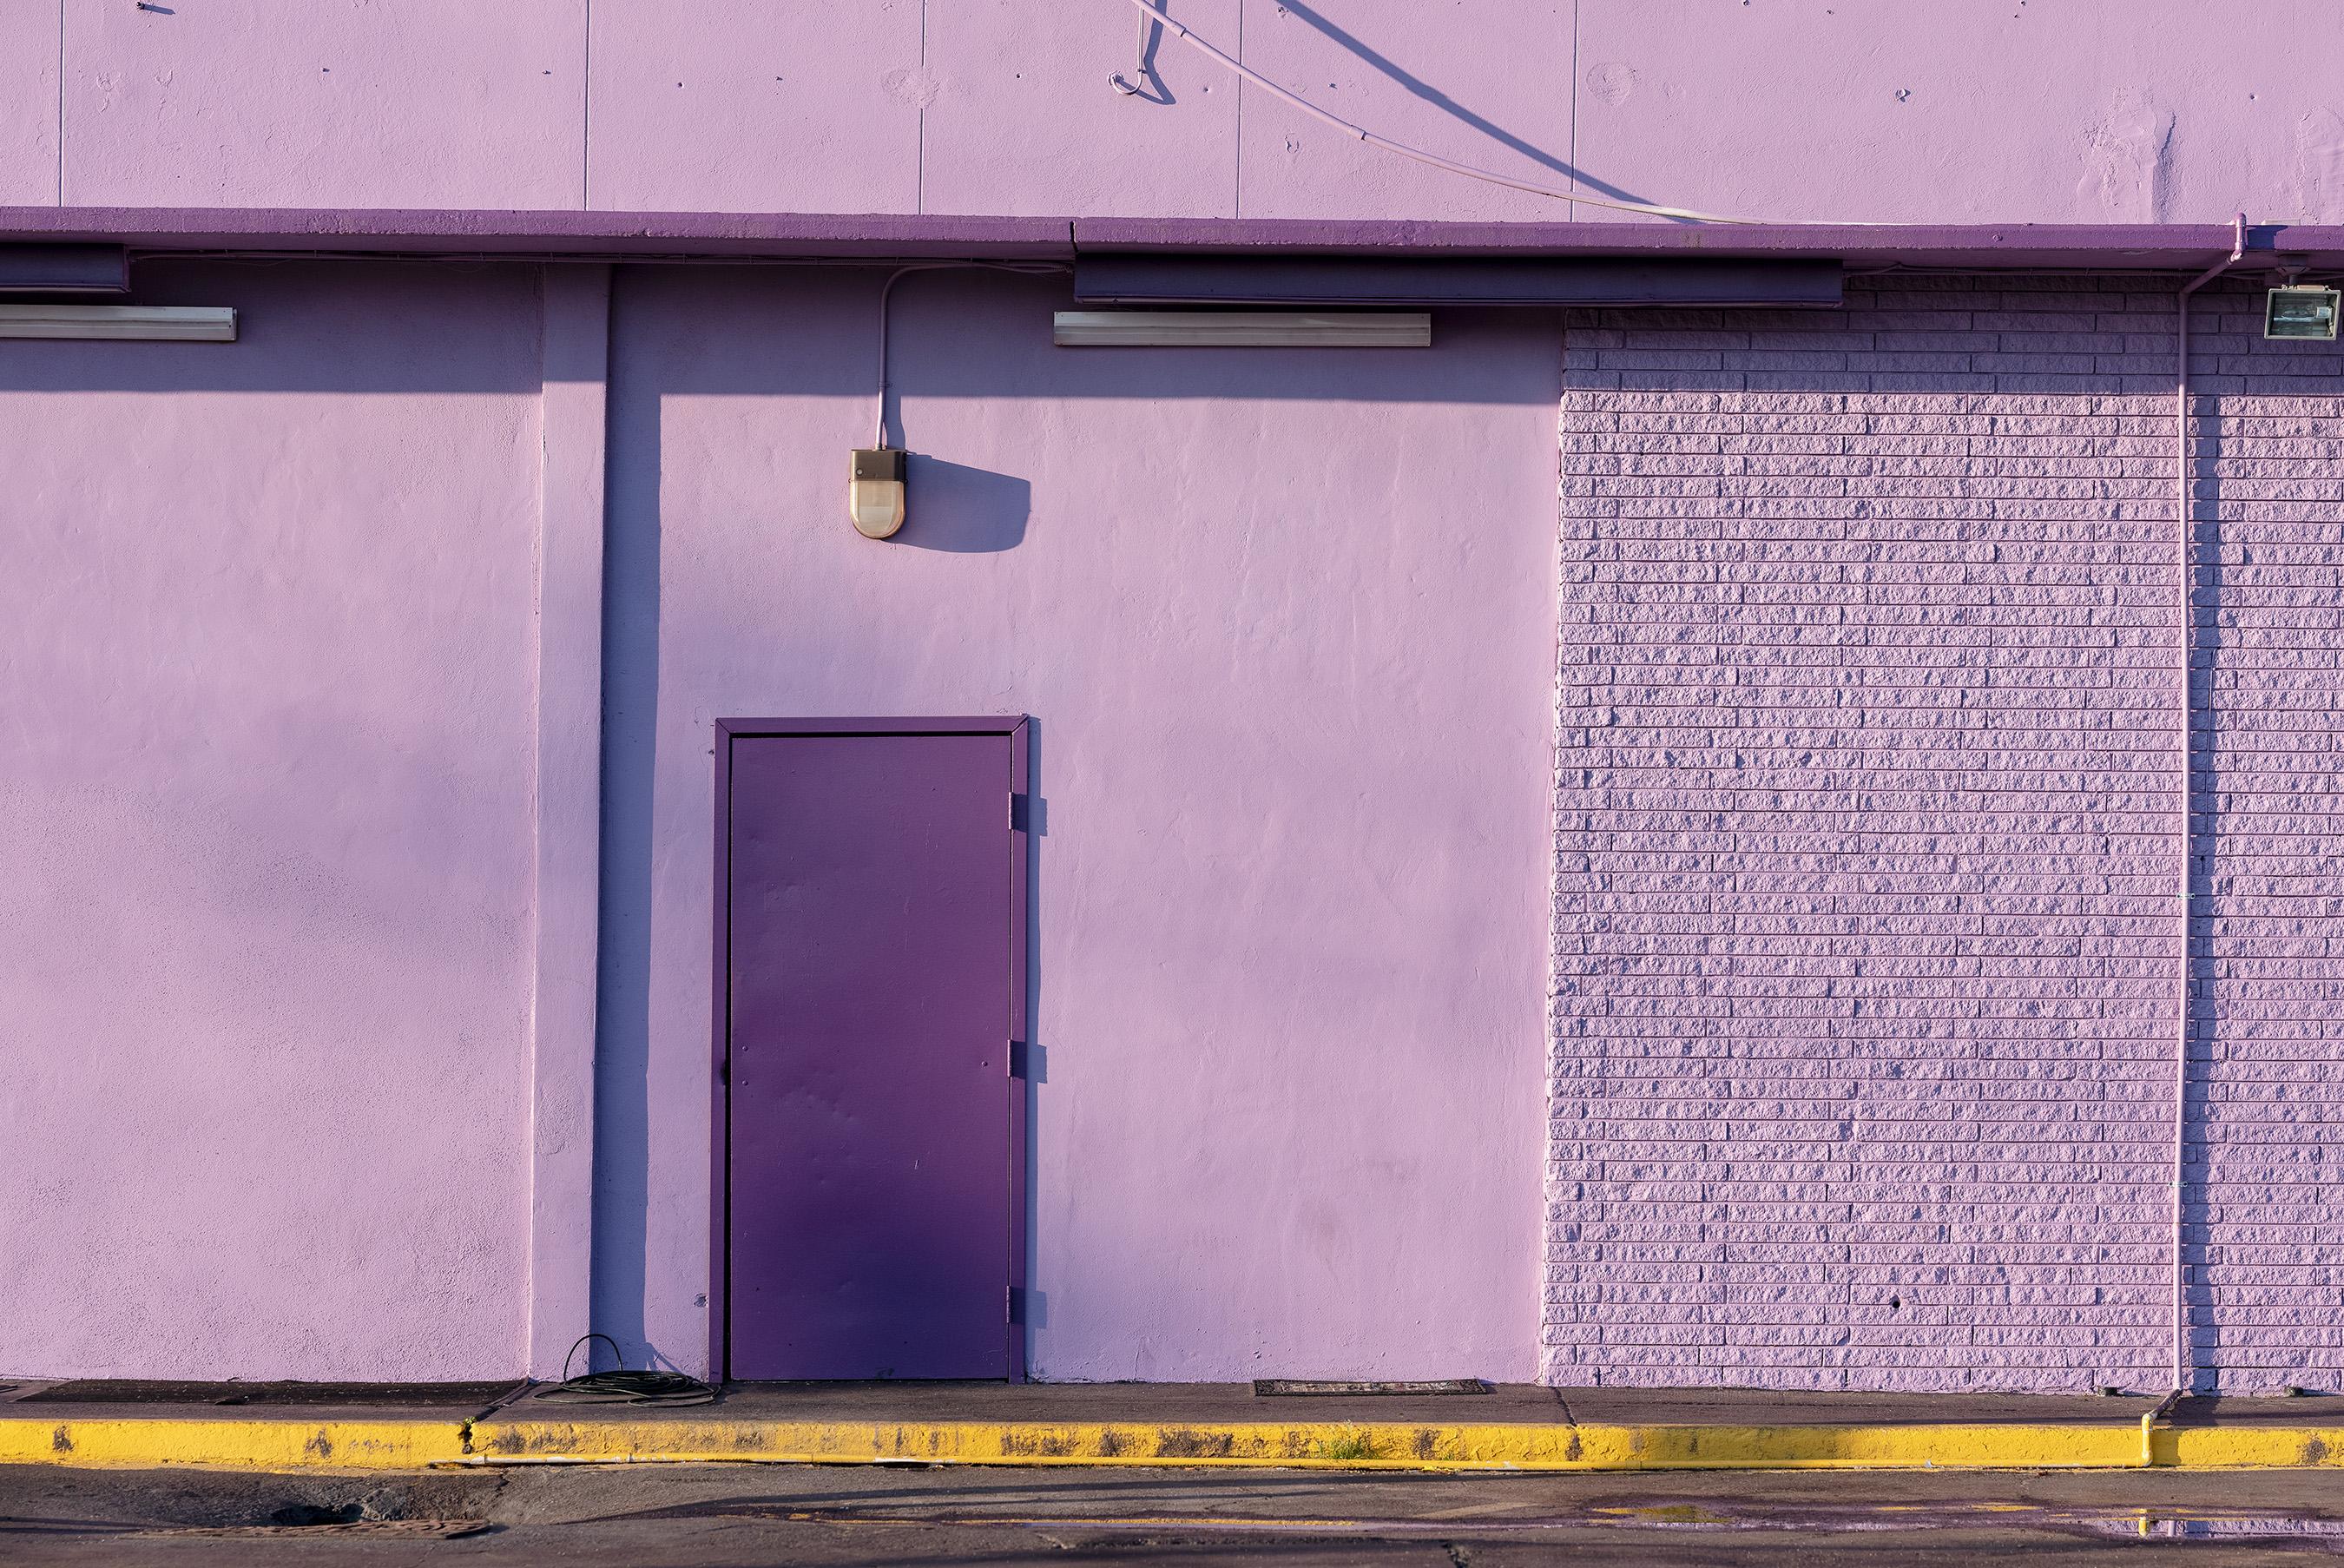 Jerry Siegel Color Photograph - "Violet (Wall & Door)" - Southern Documentary Photography - Christenberry